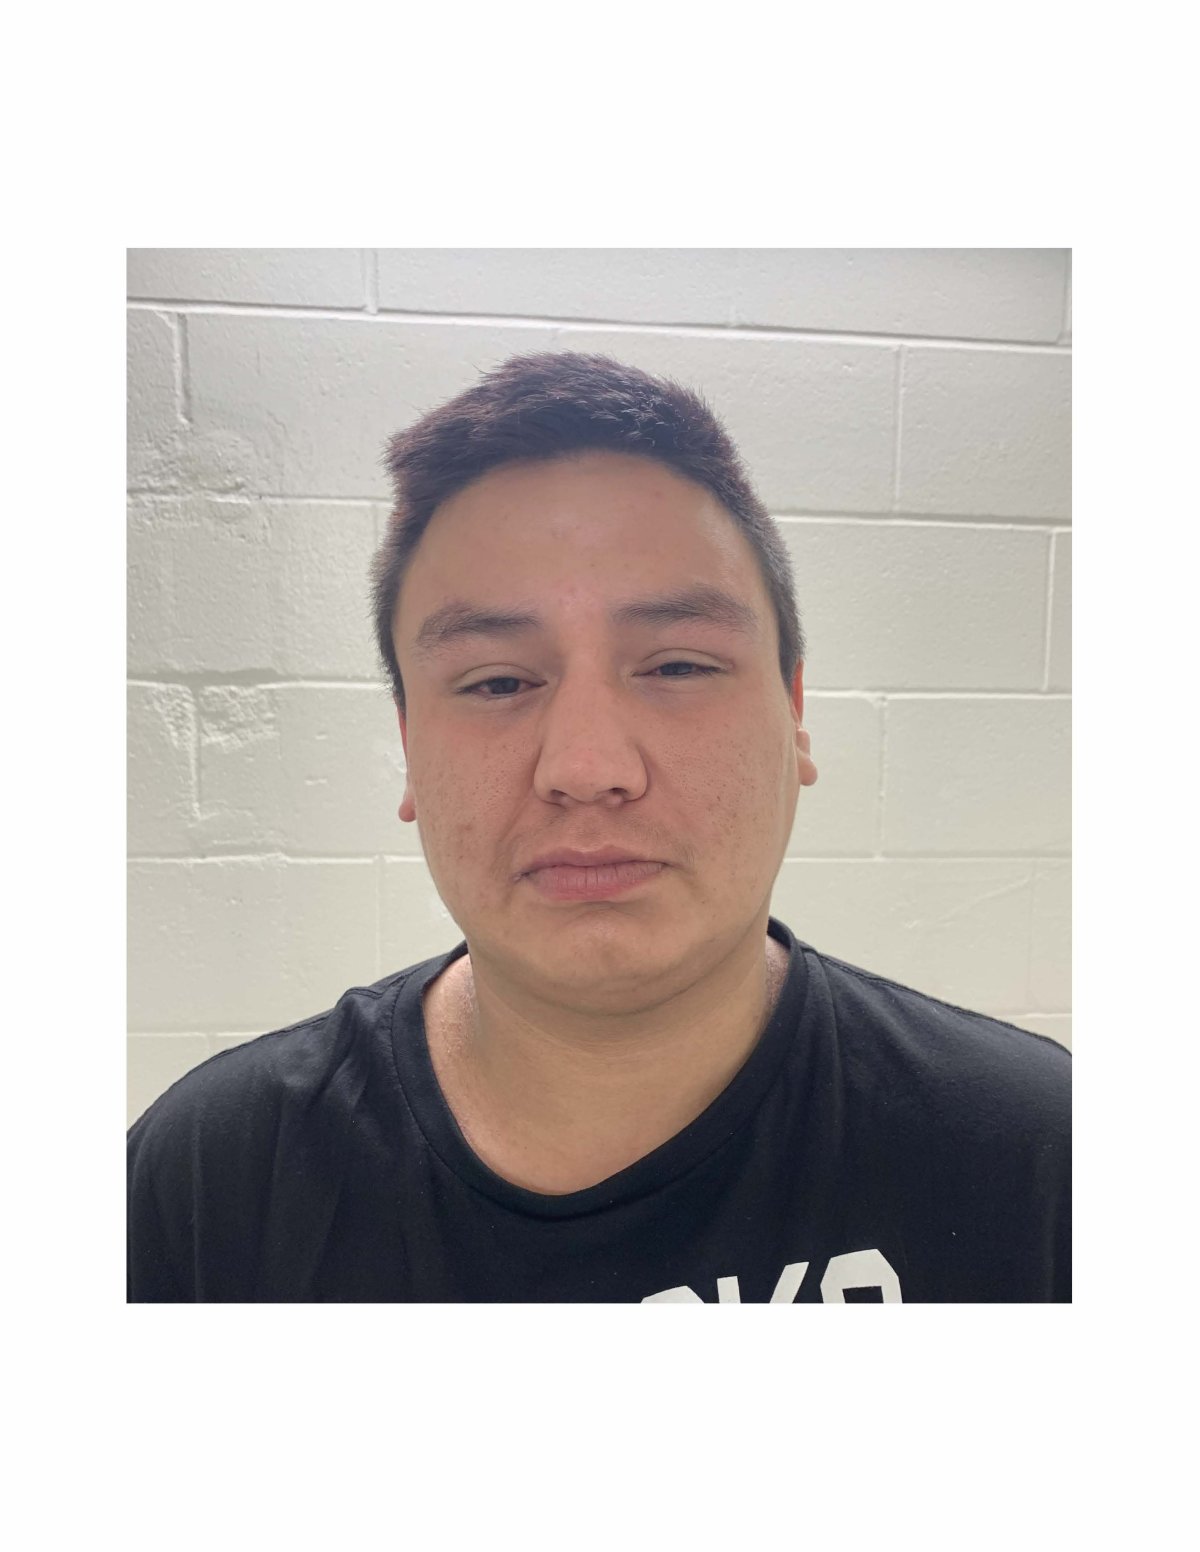 The Beauval RCMP are searching for a 31-year-old man who is facing over 30 charges and police say Trevor Alexander is considered to be armed and dangerous.